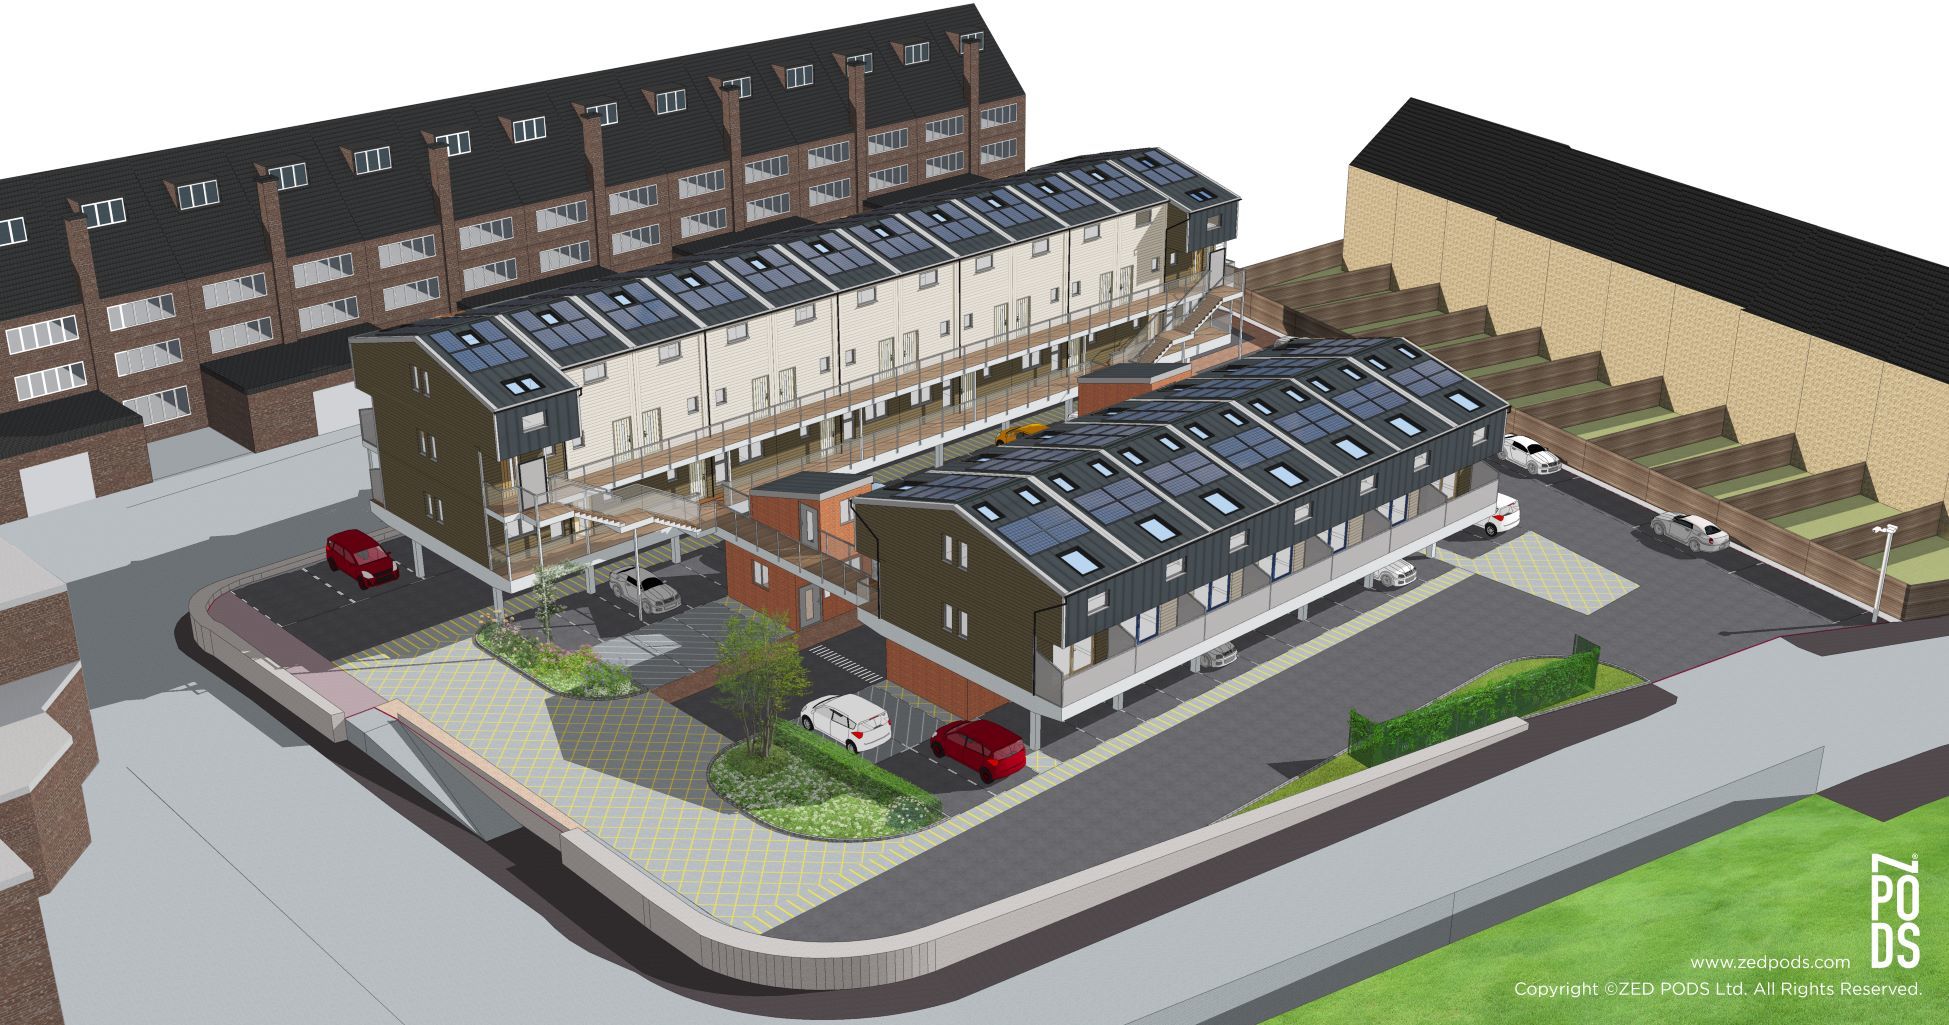 An artists impression of the project